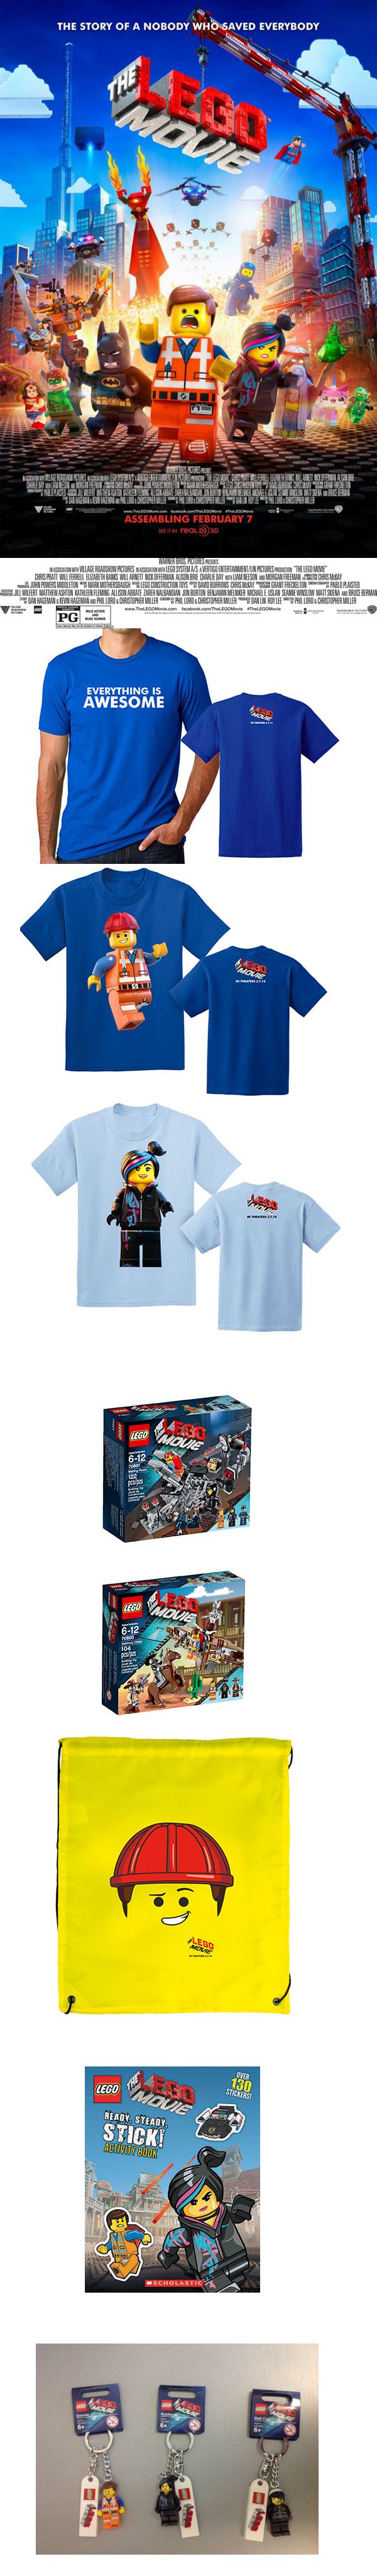 the-lego-movie-giveaway